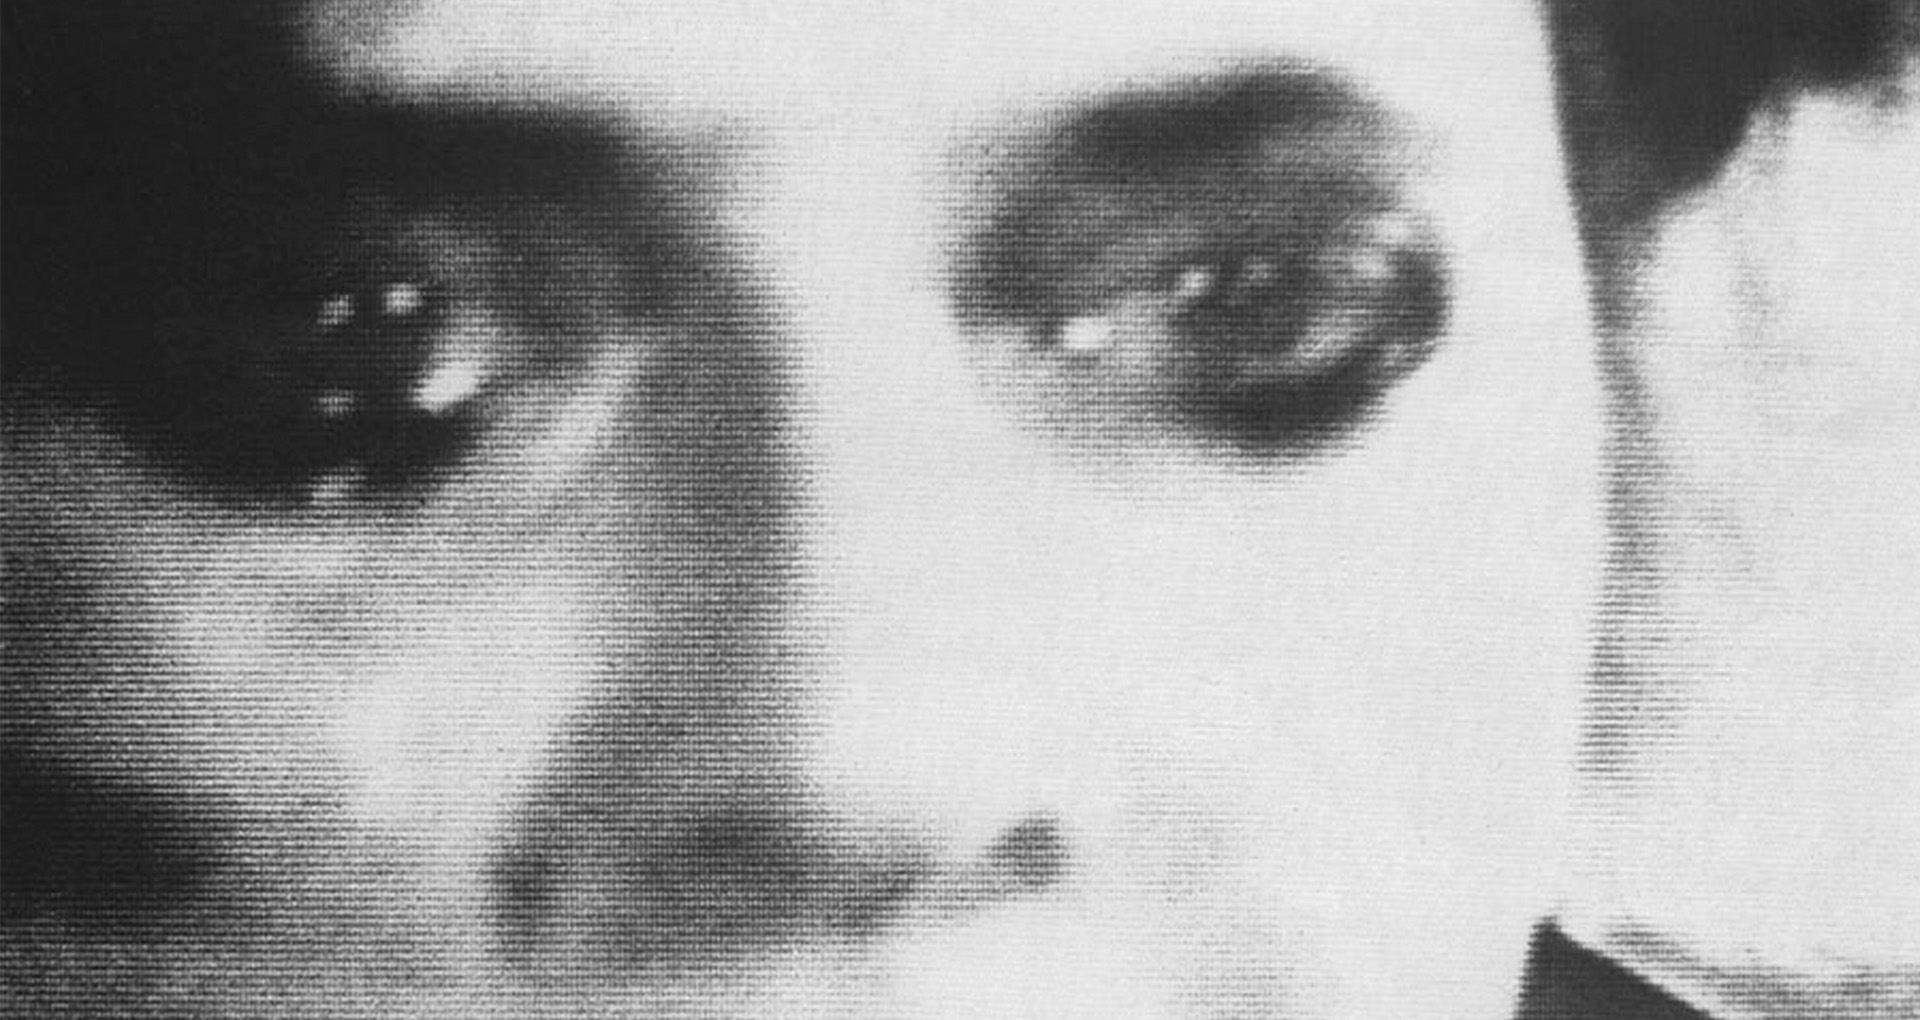 Black and white image. The eyes of a woman in close-up.